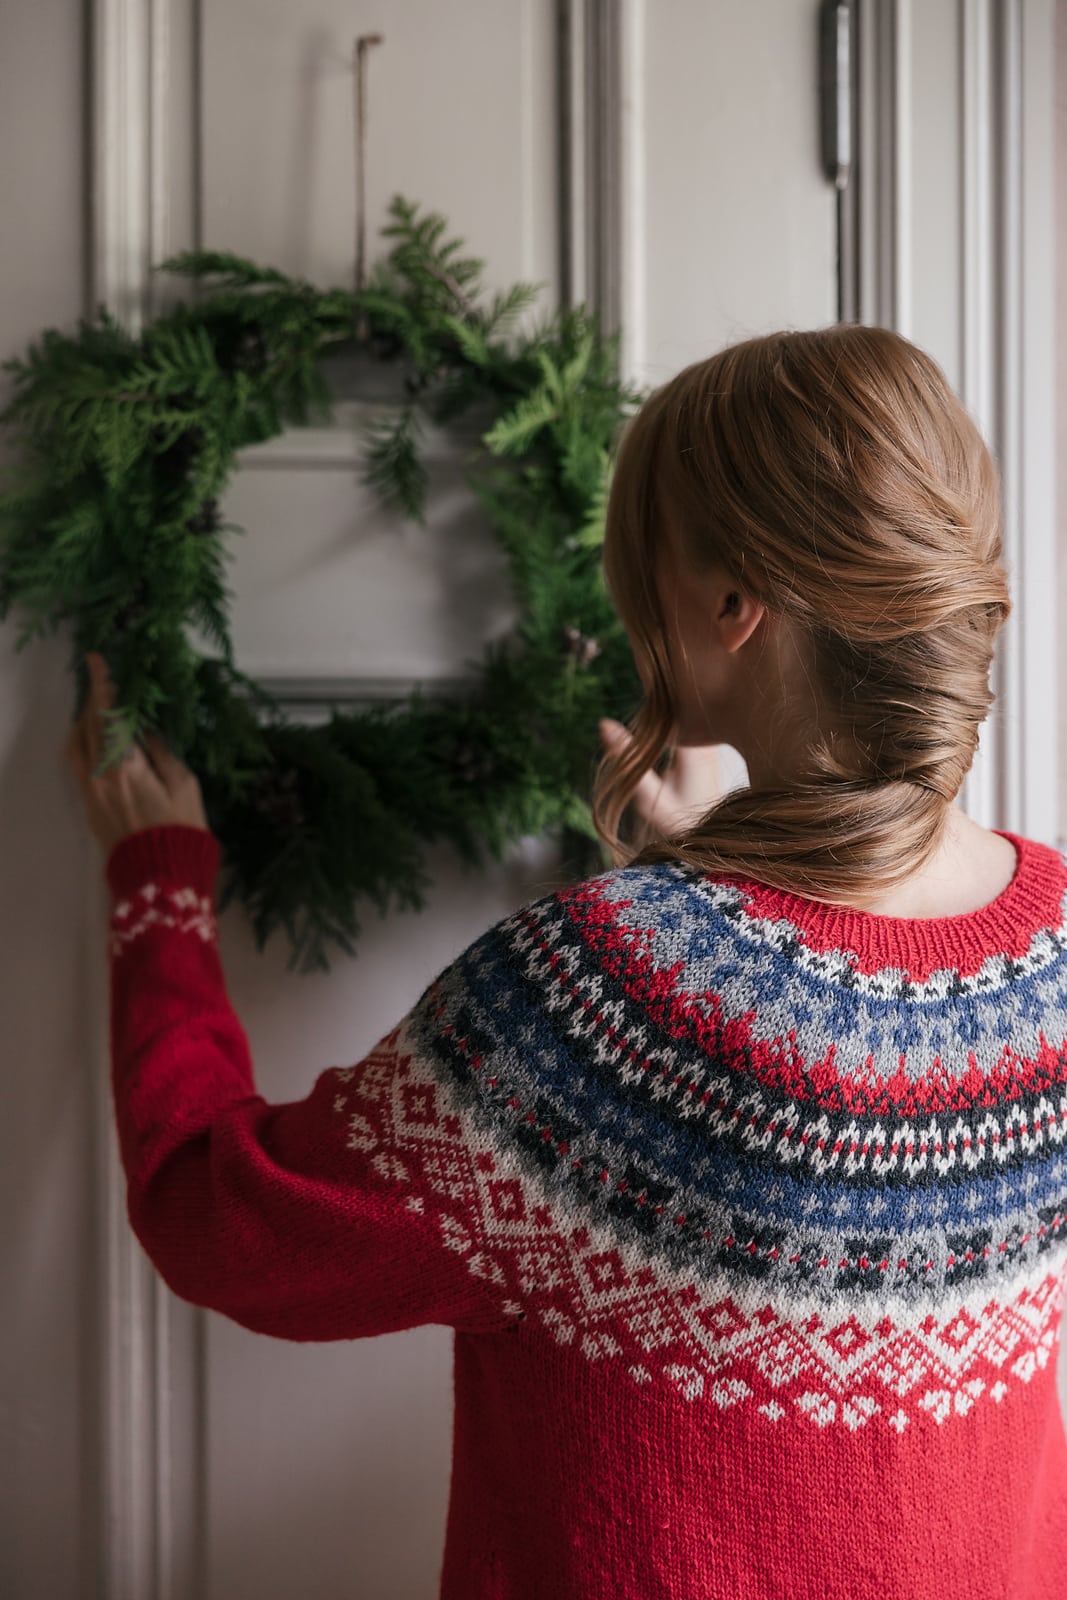 fairisle christmas dress knitting pattern by Sisko Sälpäkivi available to download for free - just one of her beautiful designs that I've shared in my blog post - including the most beautiful snow mittens pattern that you can buy on love crafts